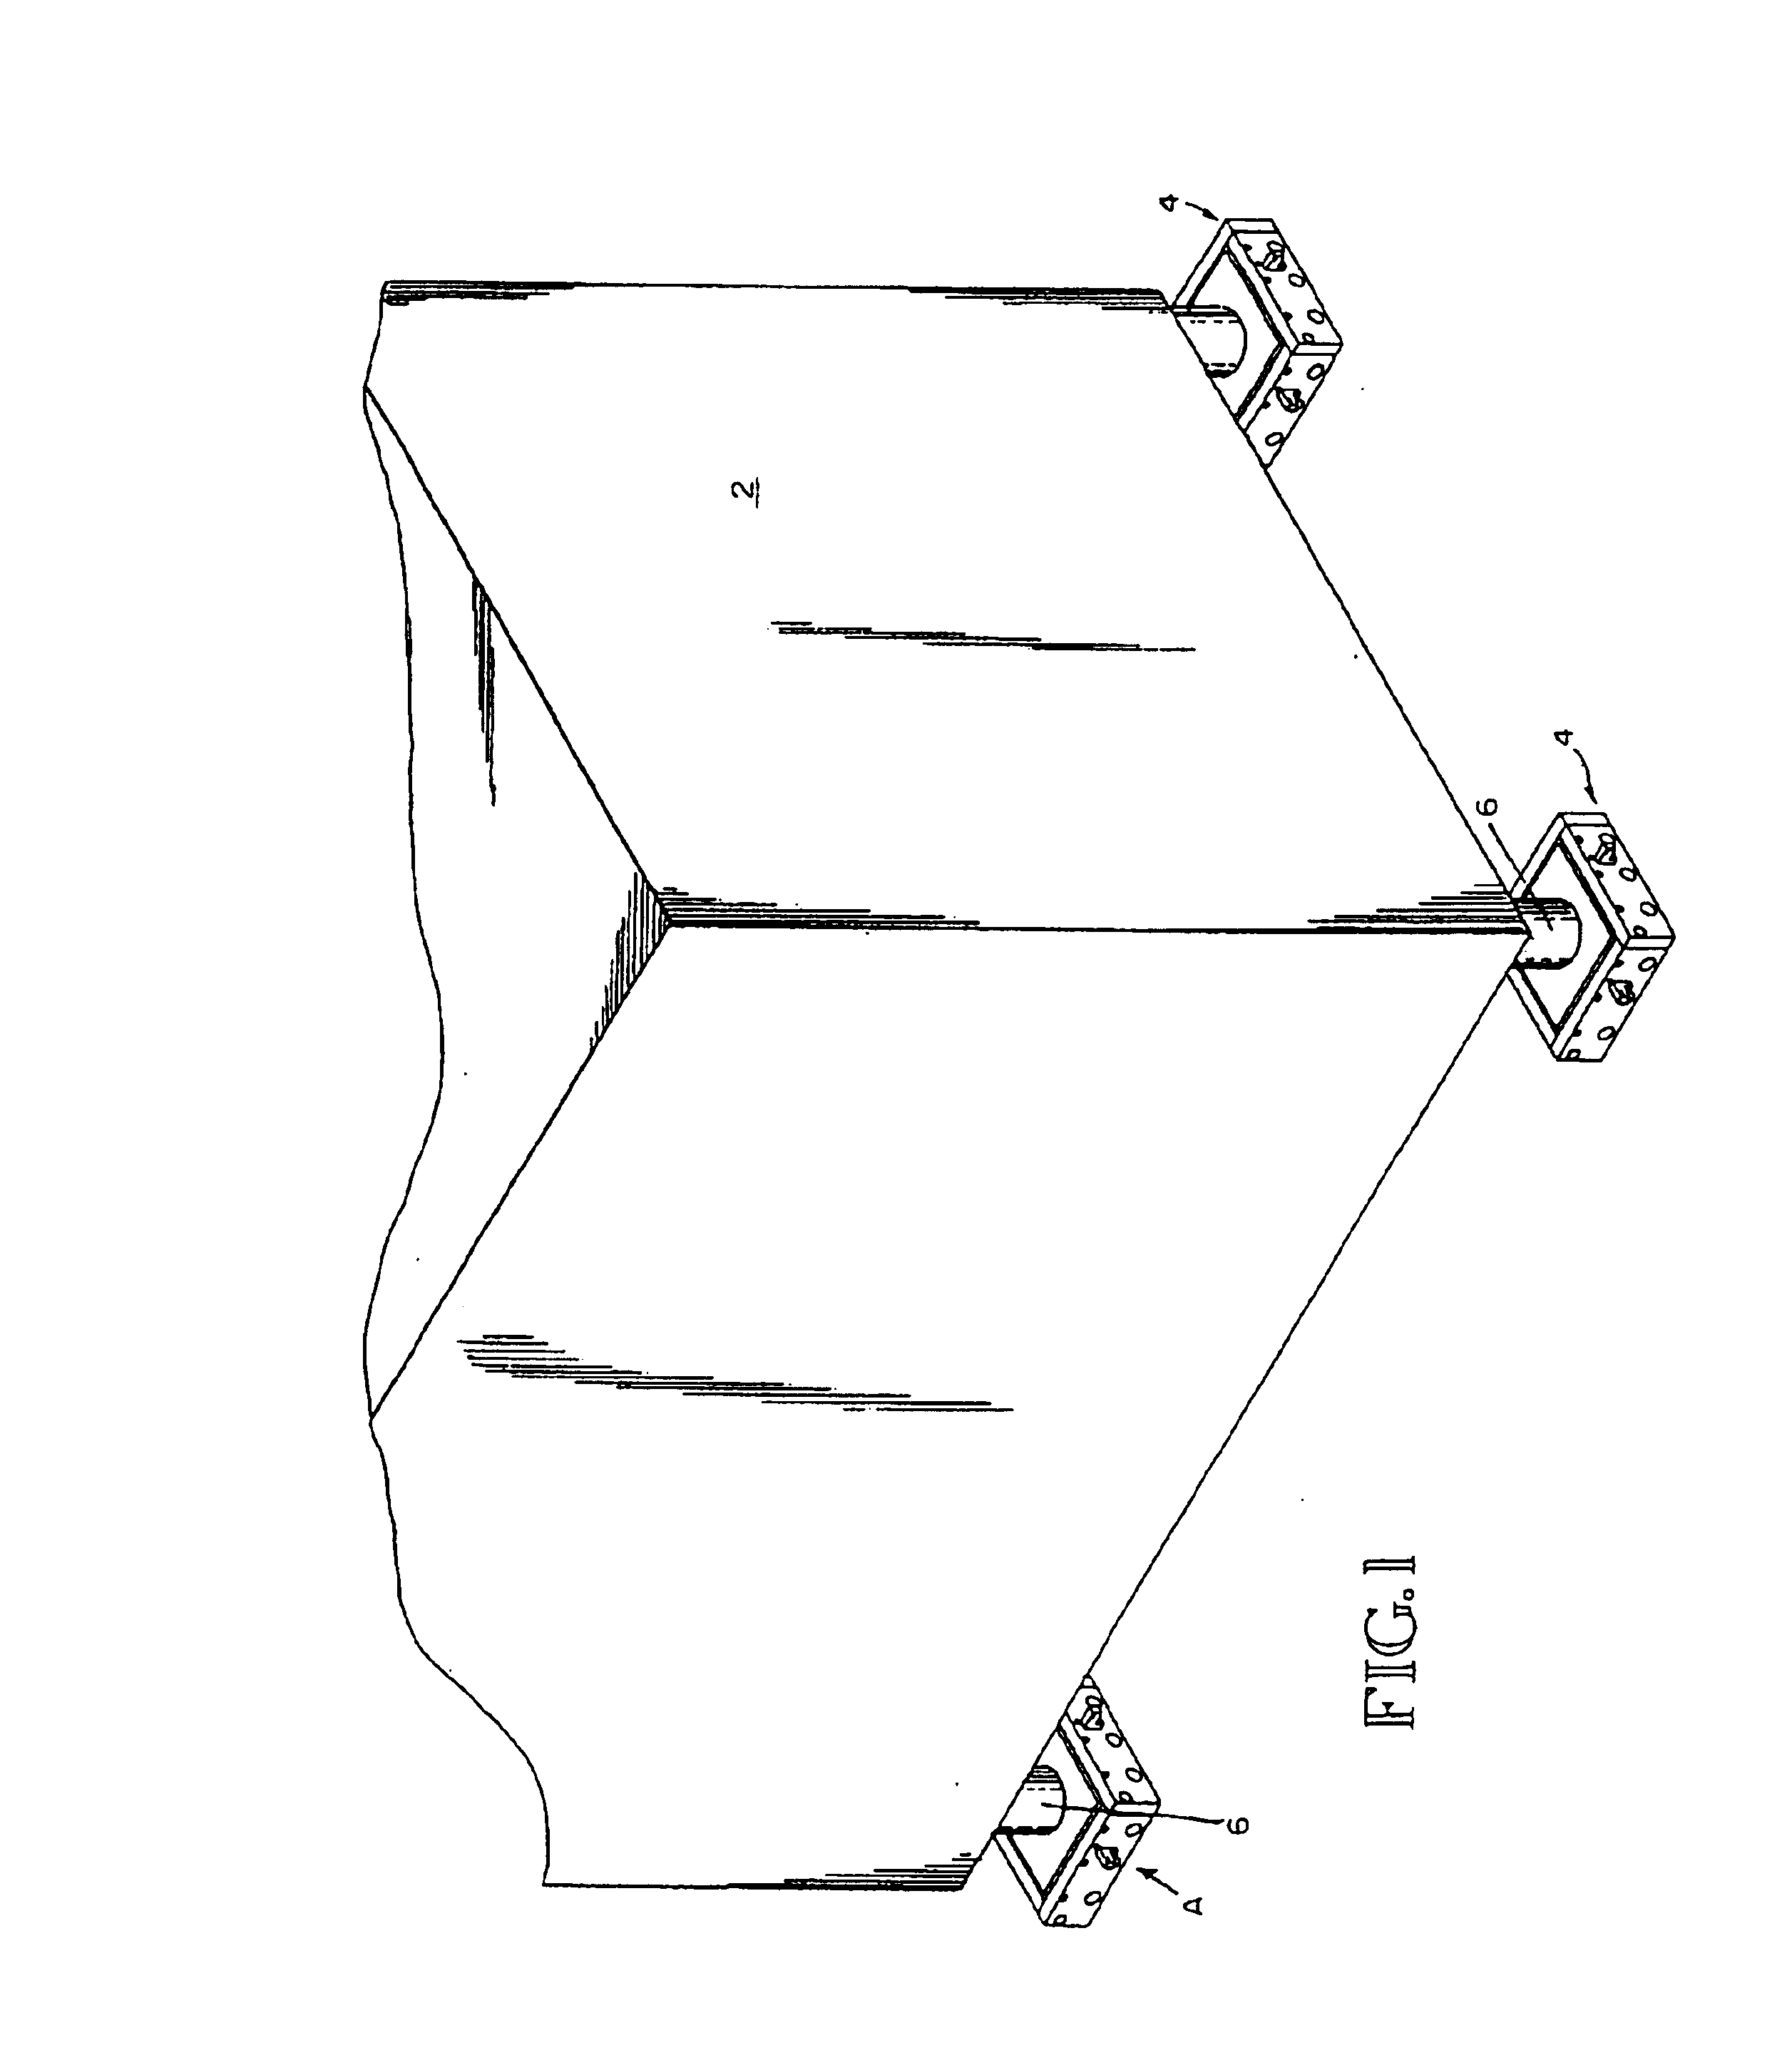 Alignment tool and method for aligning large machinery